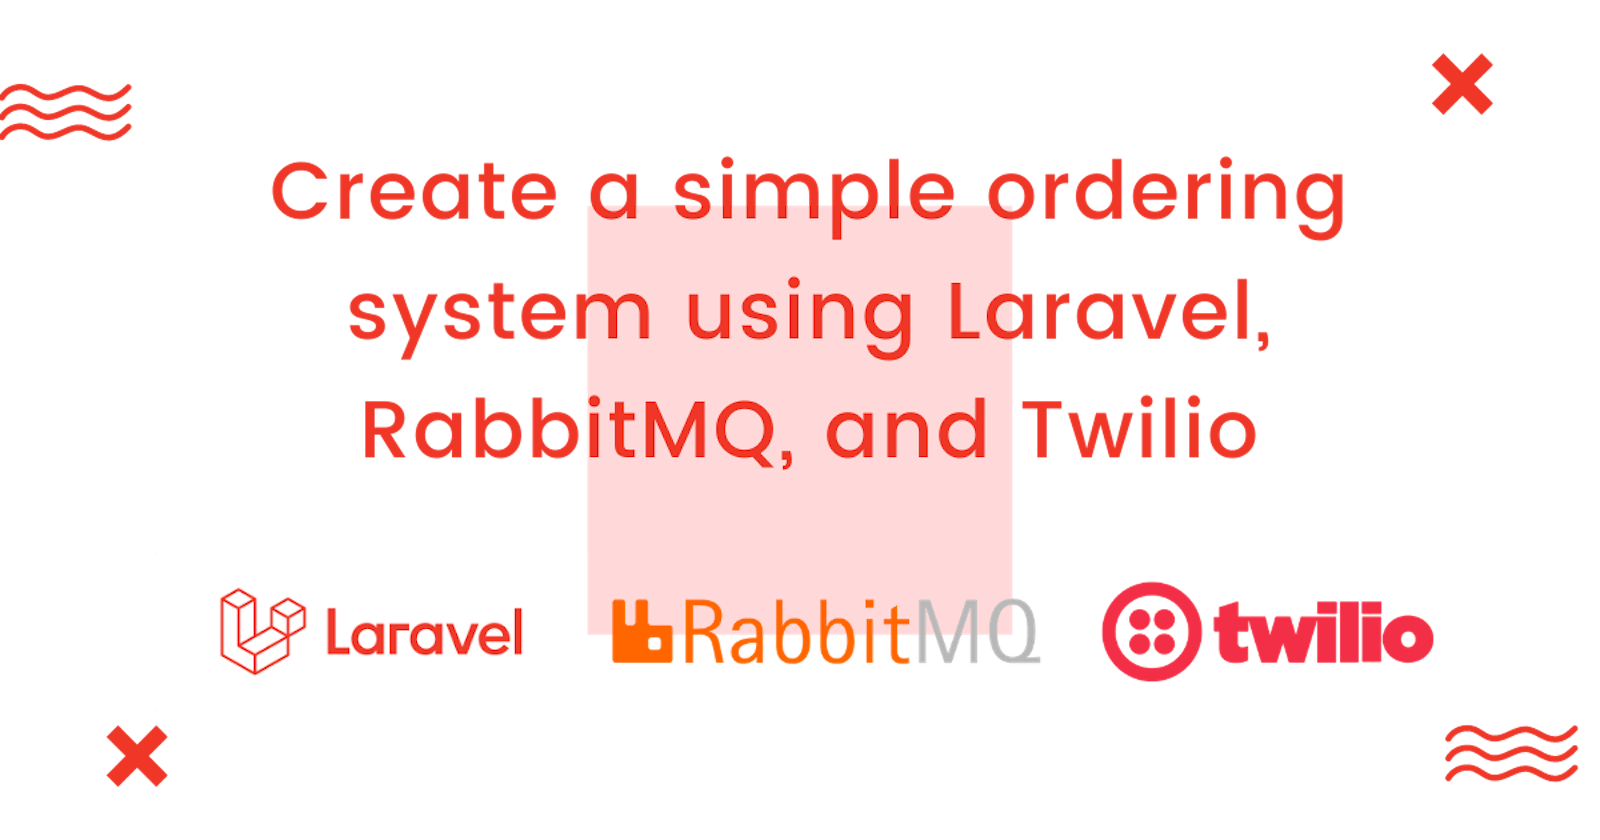 Let's create an ordering system using Laravel, RabbitMQ, and Twilio